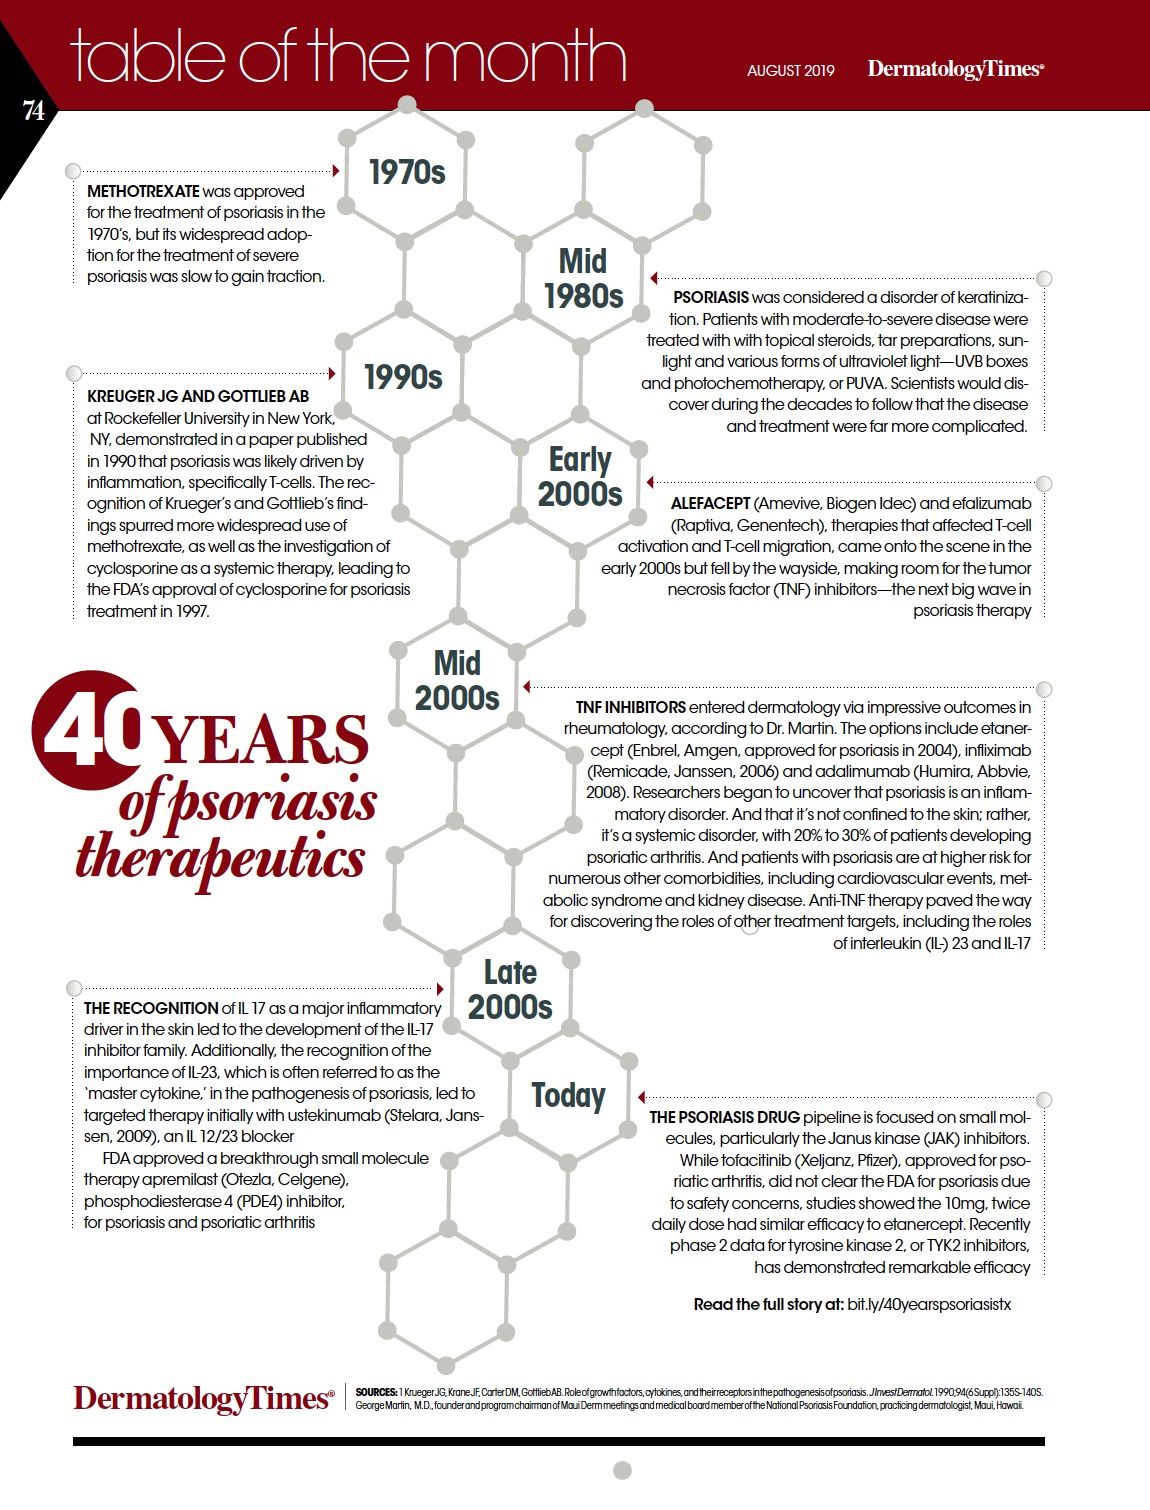 Psoriasis treatments over past forty years.